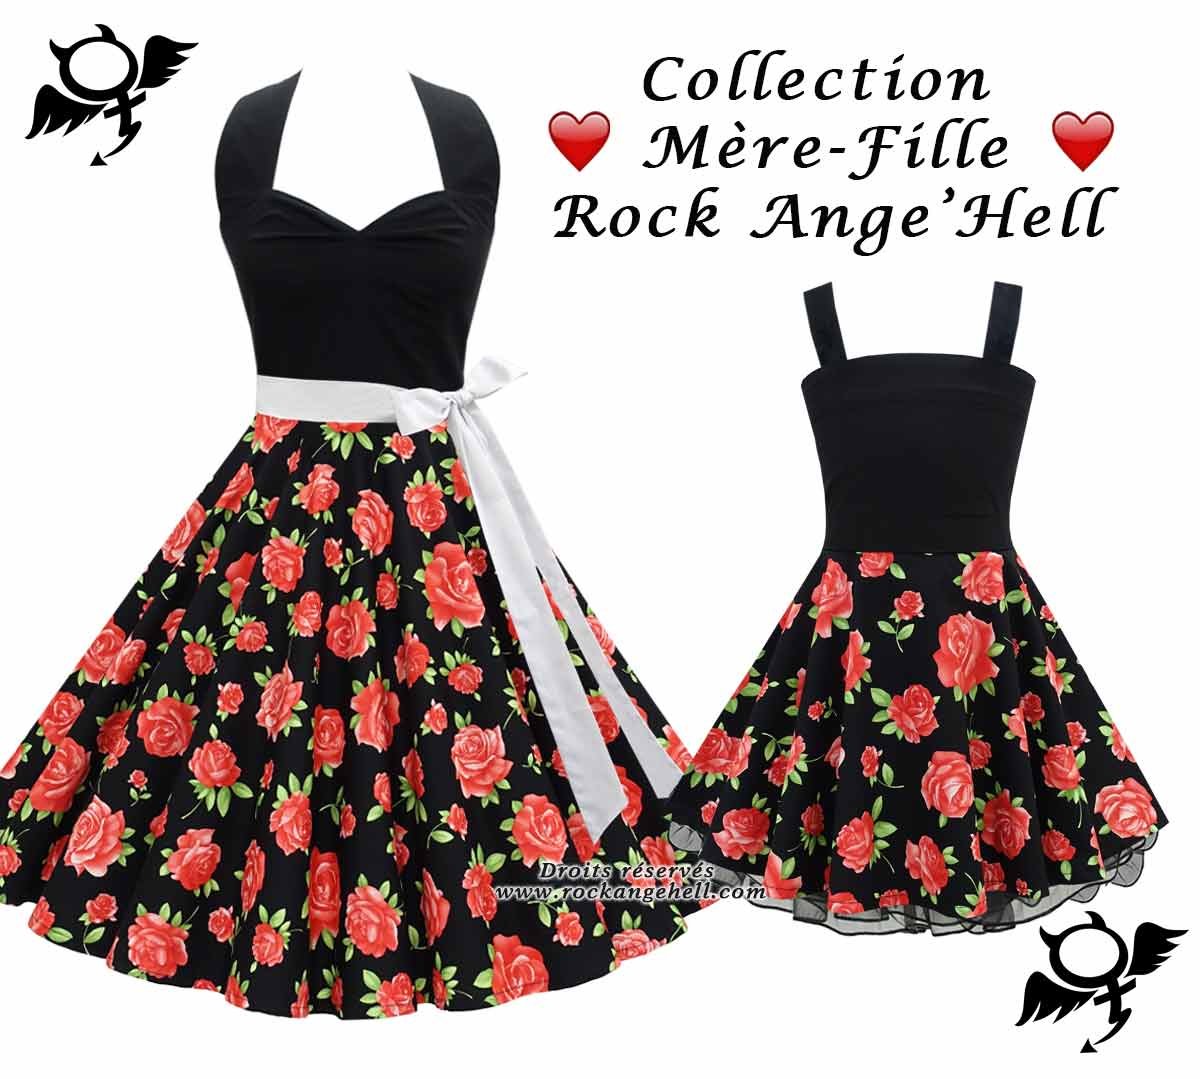 Collection-Rock-AngeHell-Mere-Fille20.jpg